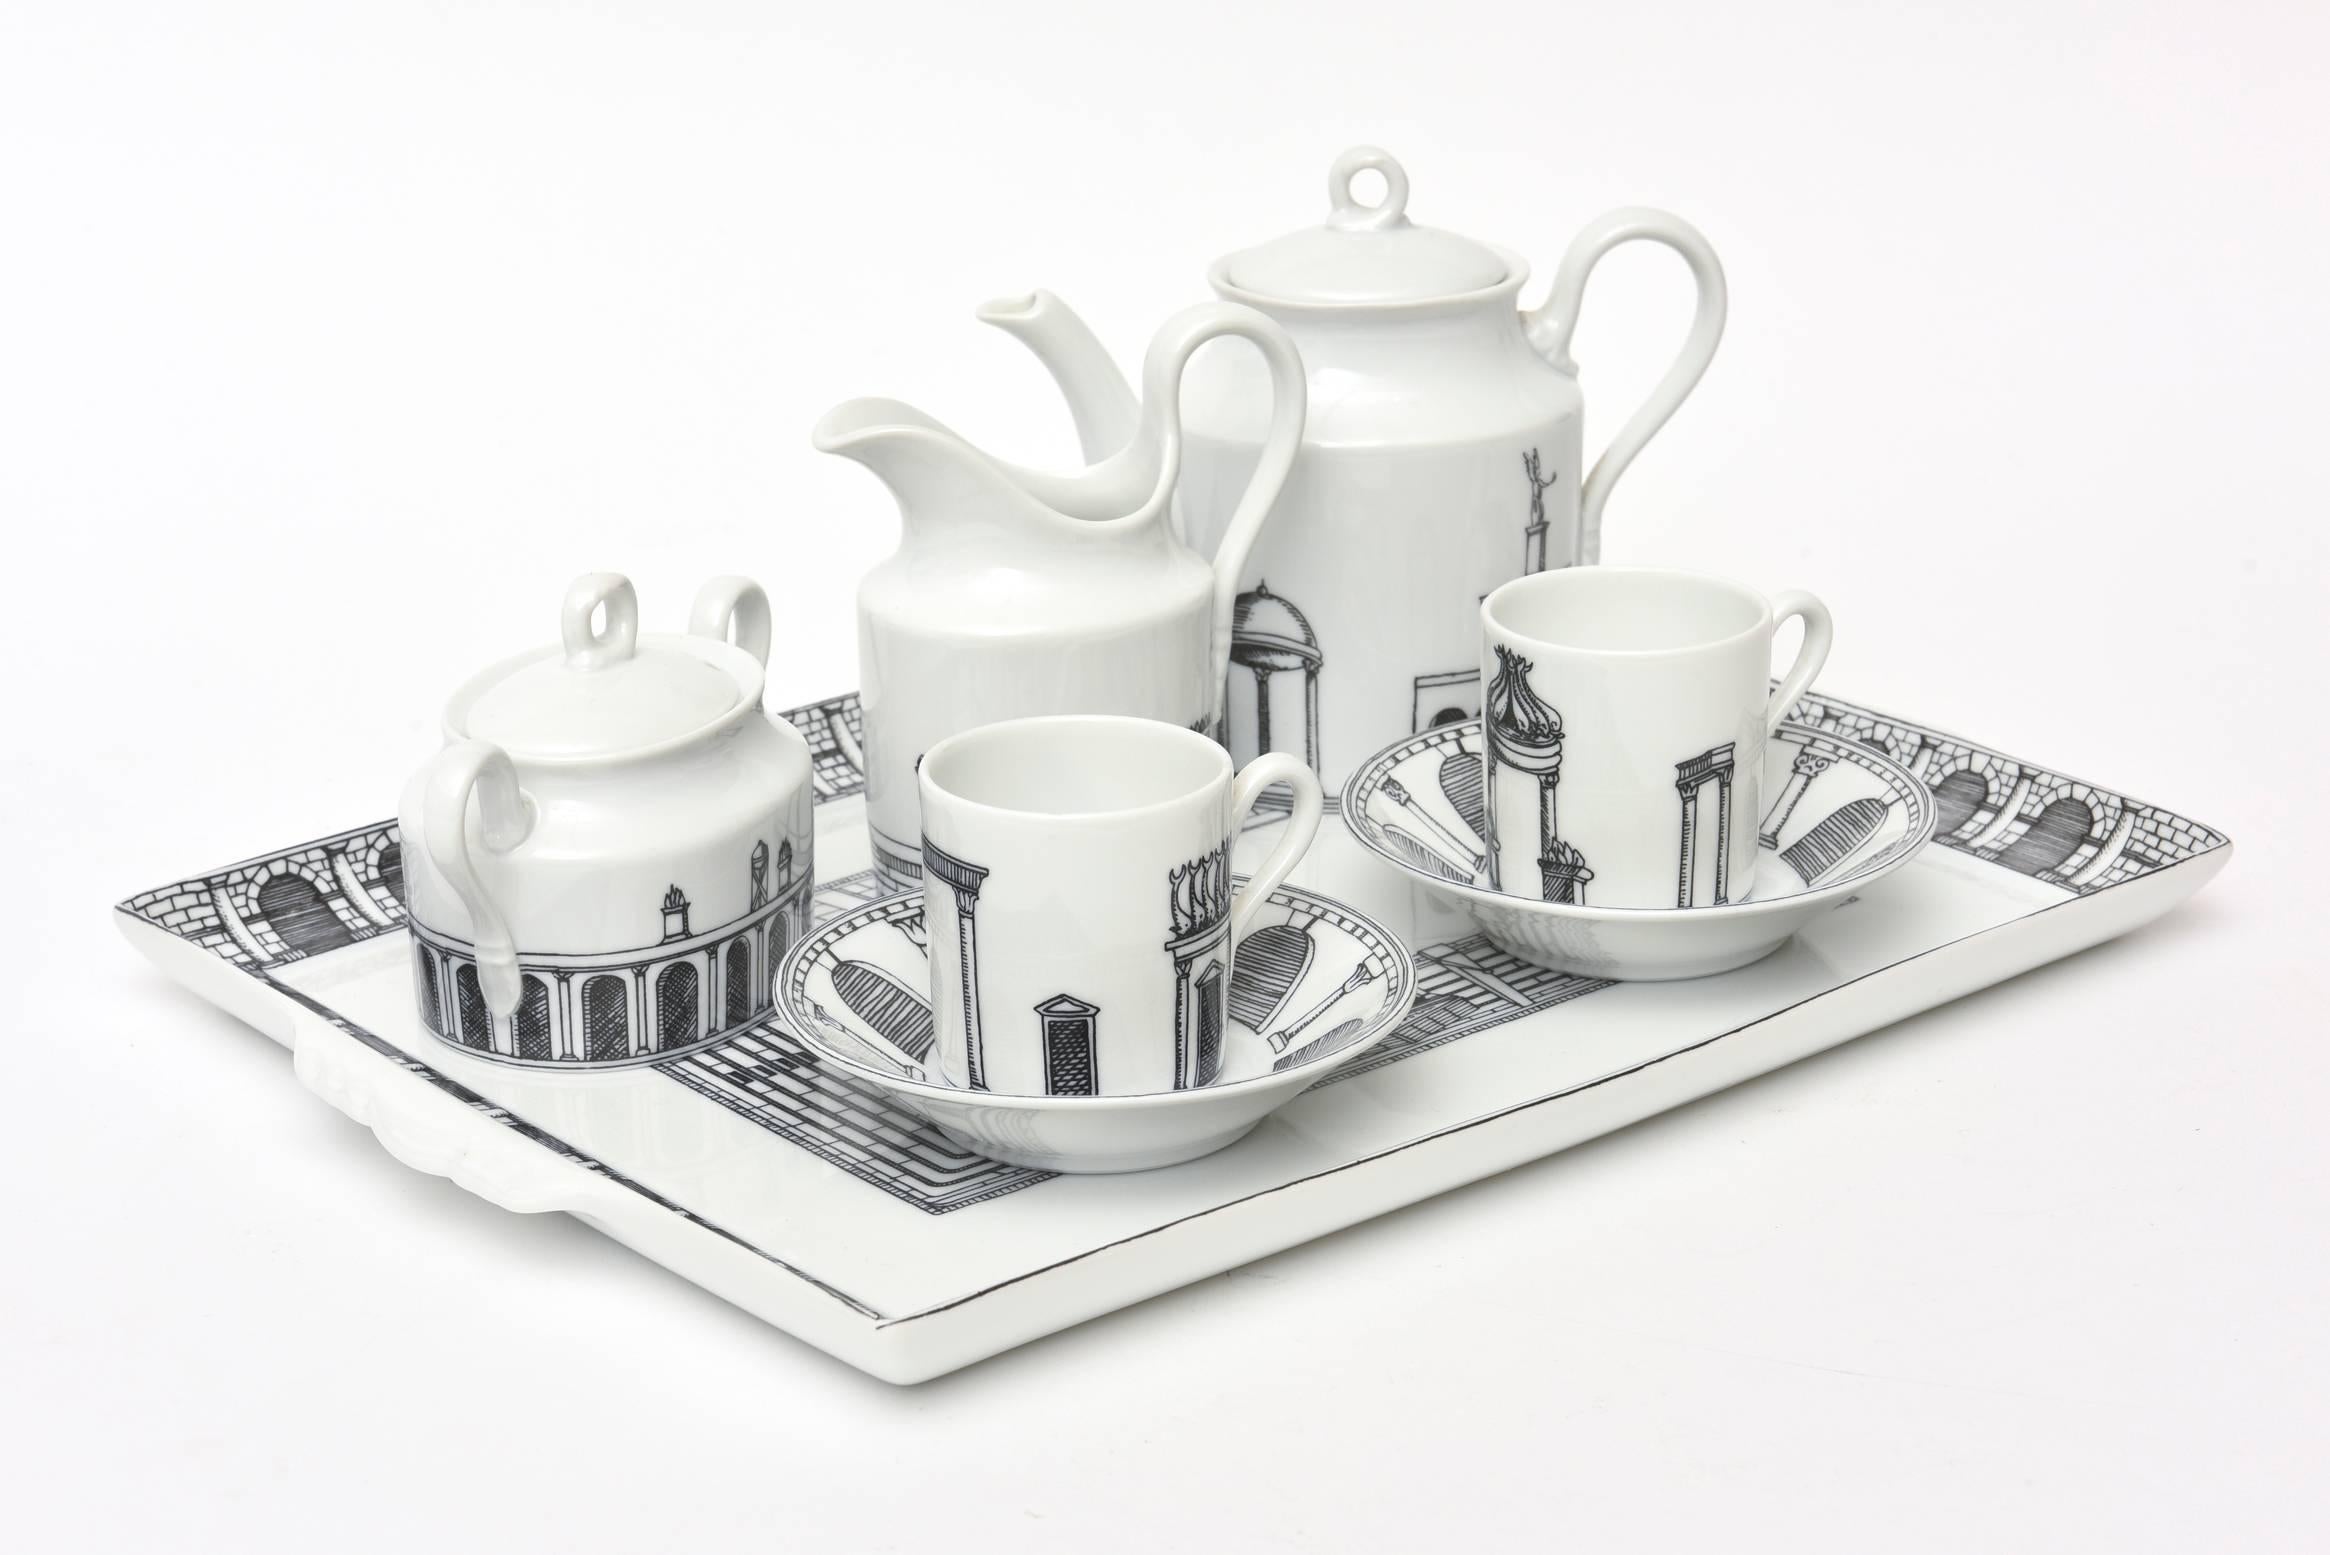 This Italian Fornasetti rare and very special architectural black and white small porcelain tea or coffee set with original tray belonged to the son of Fornasetti and was purchased from them by a friend of theirs. It is from the 1970s. It is on the